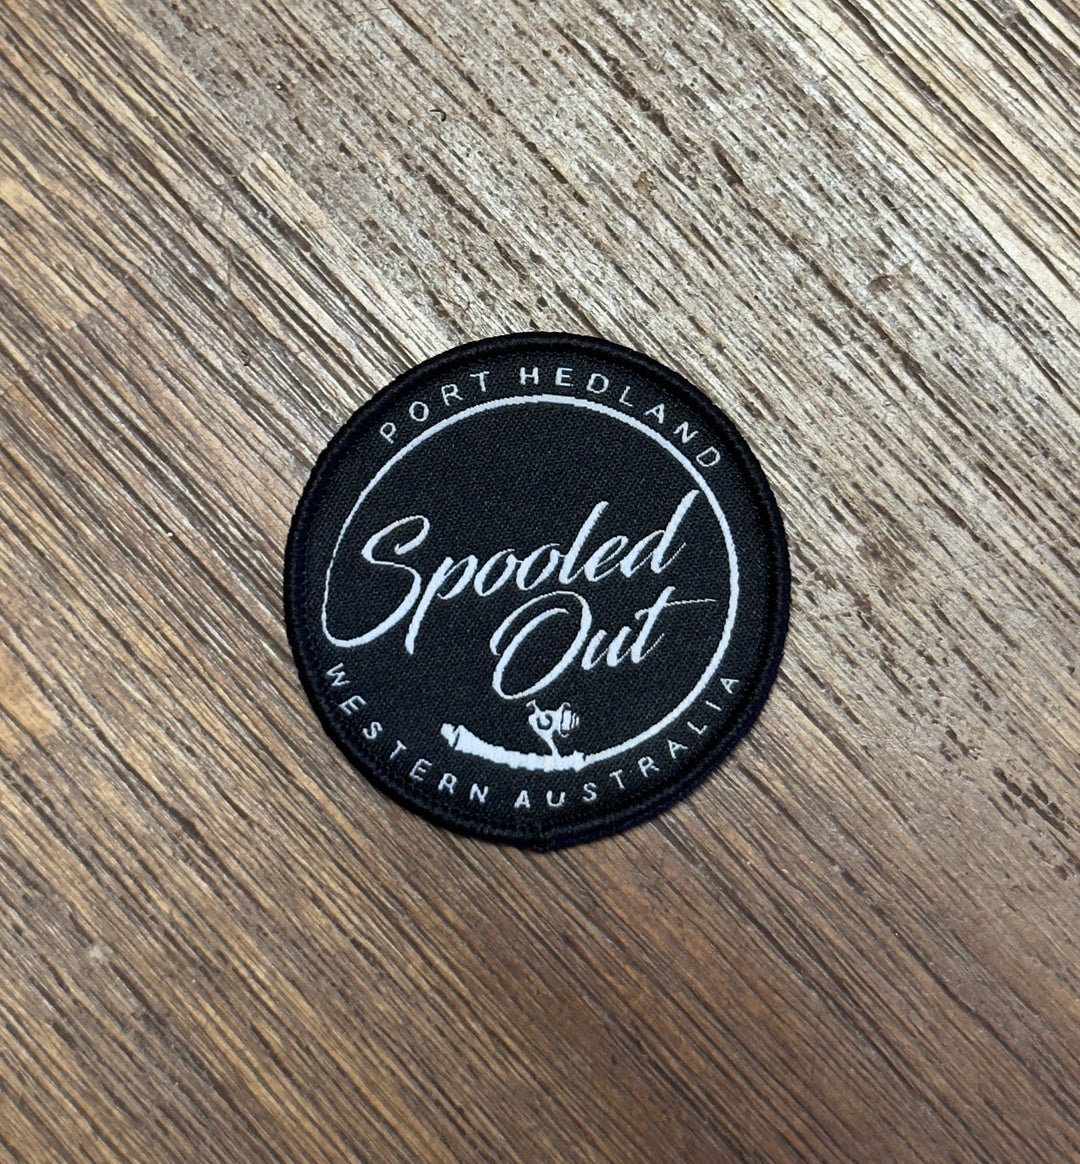 Spooled Out Australia round patch